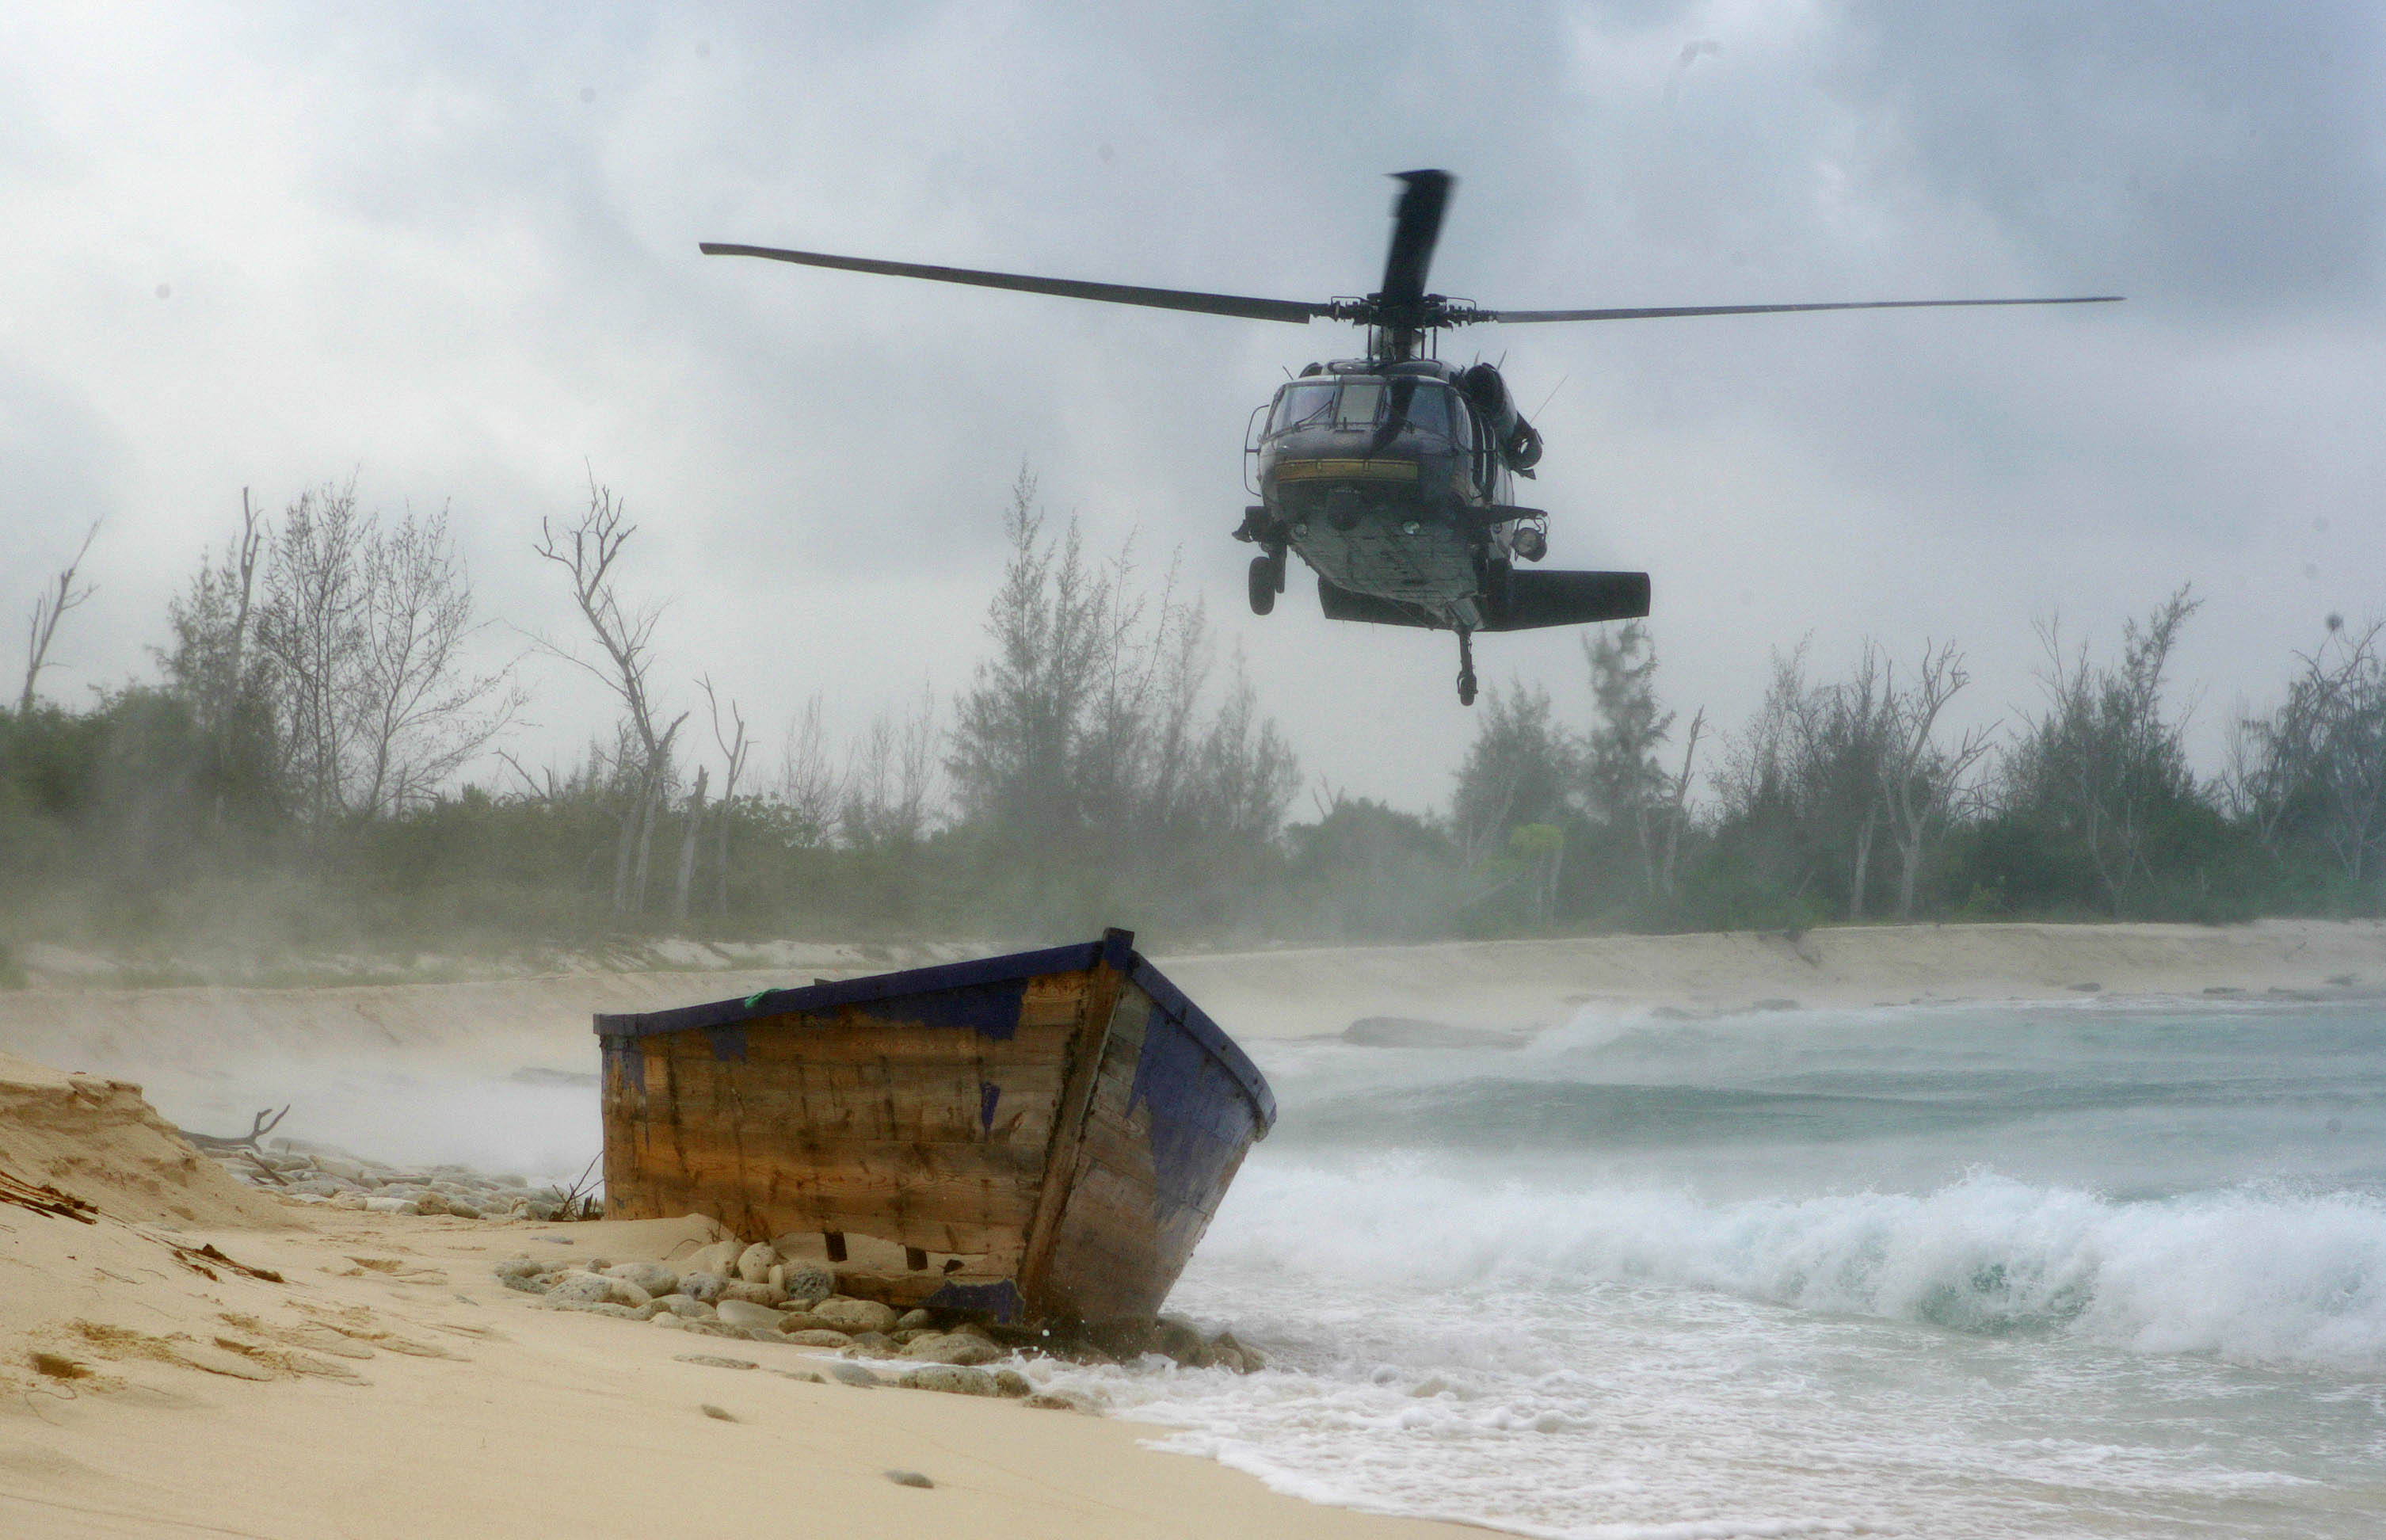 A CBP UH-60 Black Hawk helicopter flies over an island in Puerto Rico searching for people seeking asylum in the U.S.